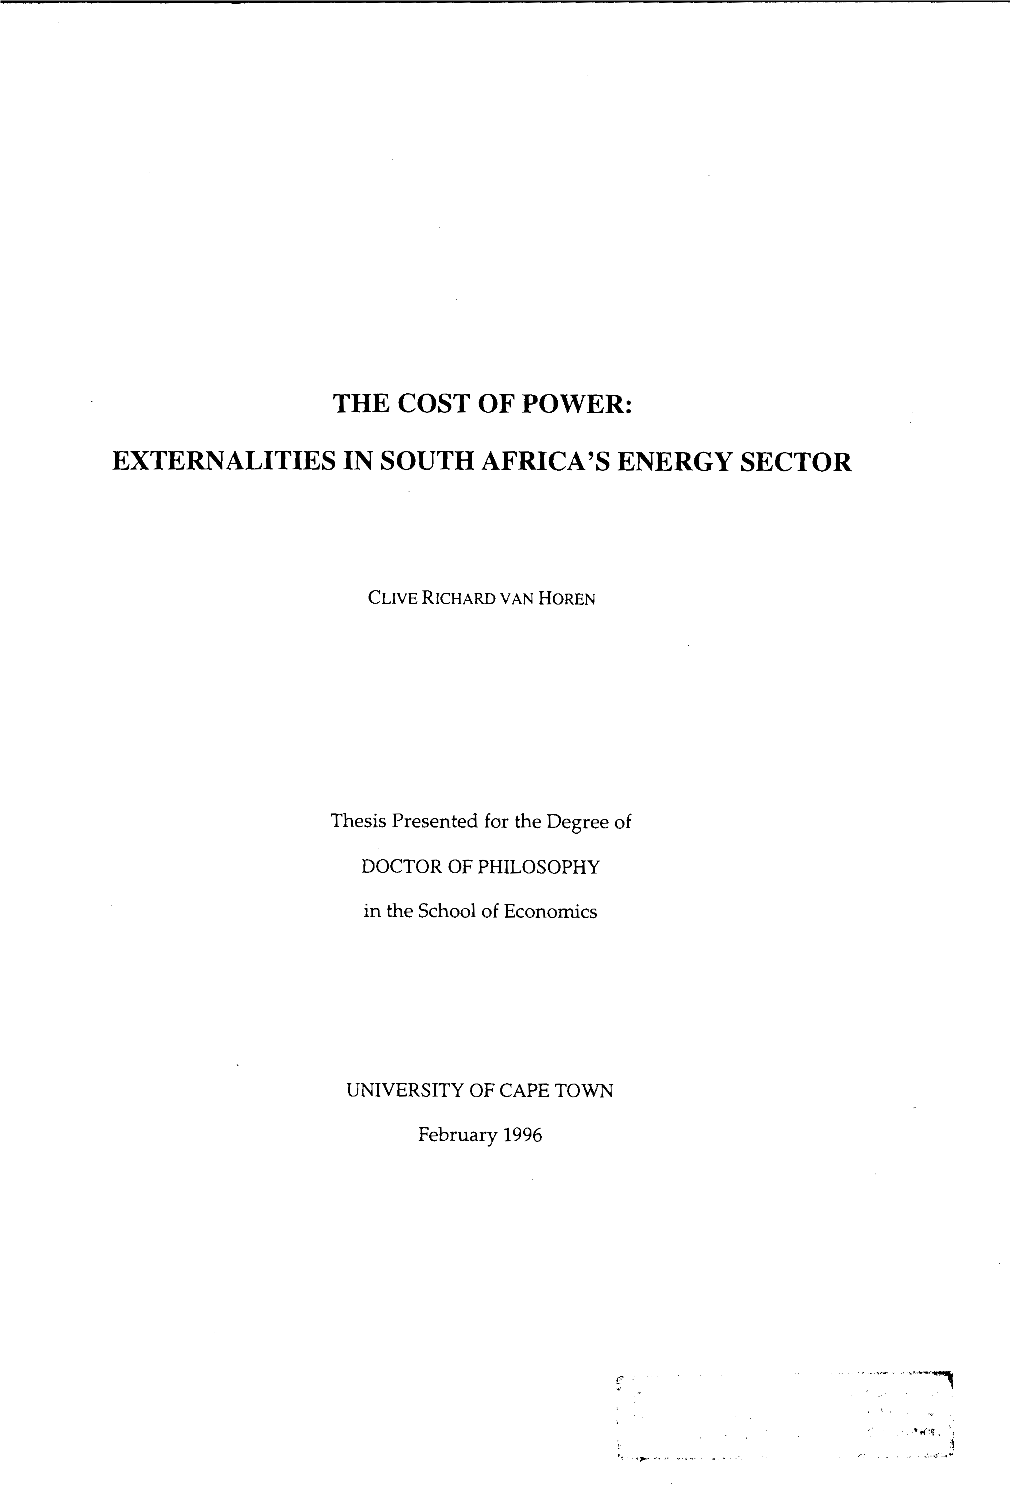 Externalities in South Africa's Energy Sector